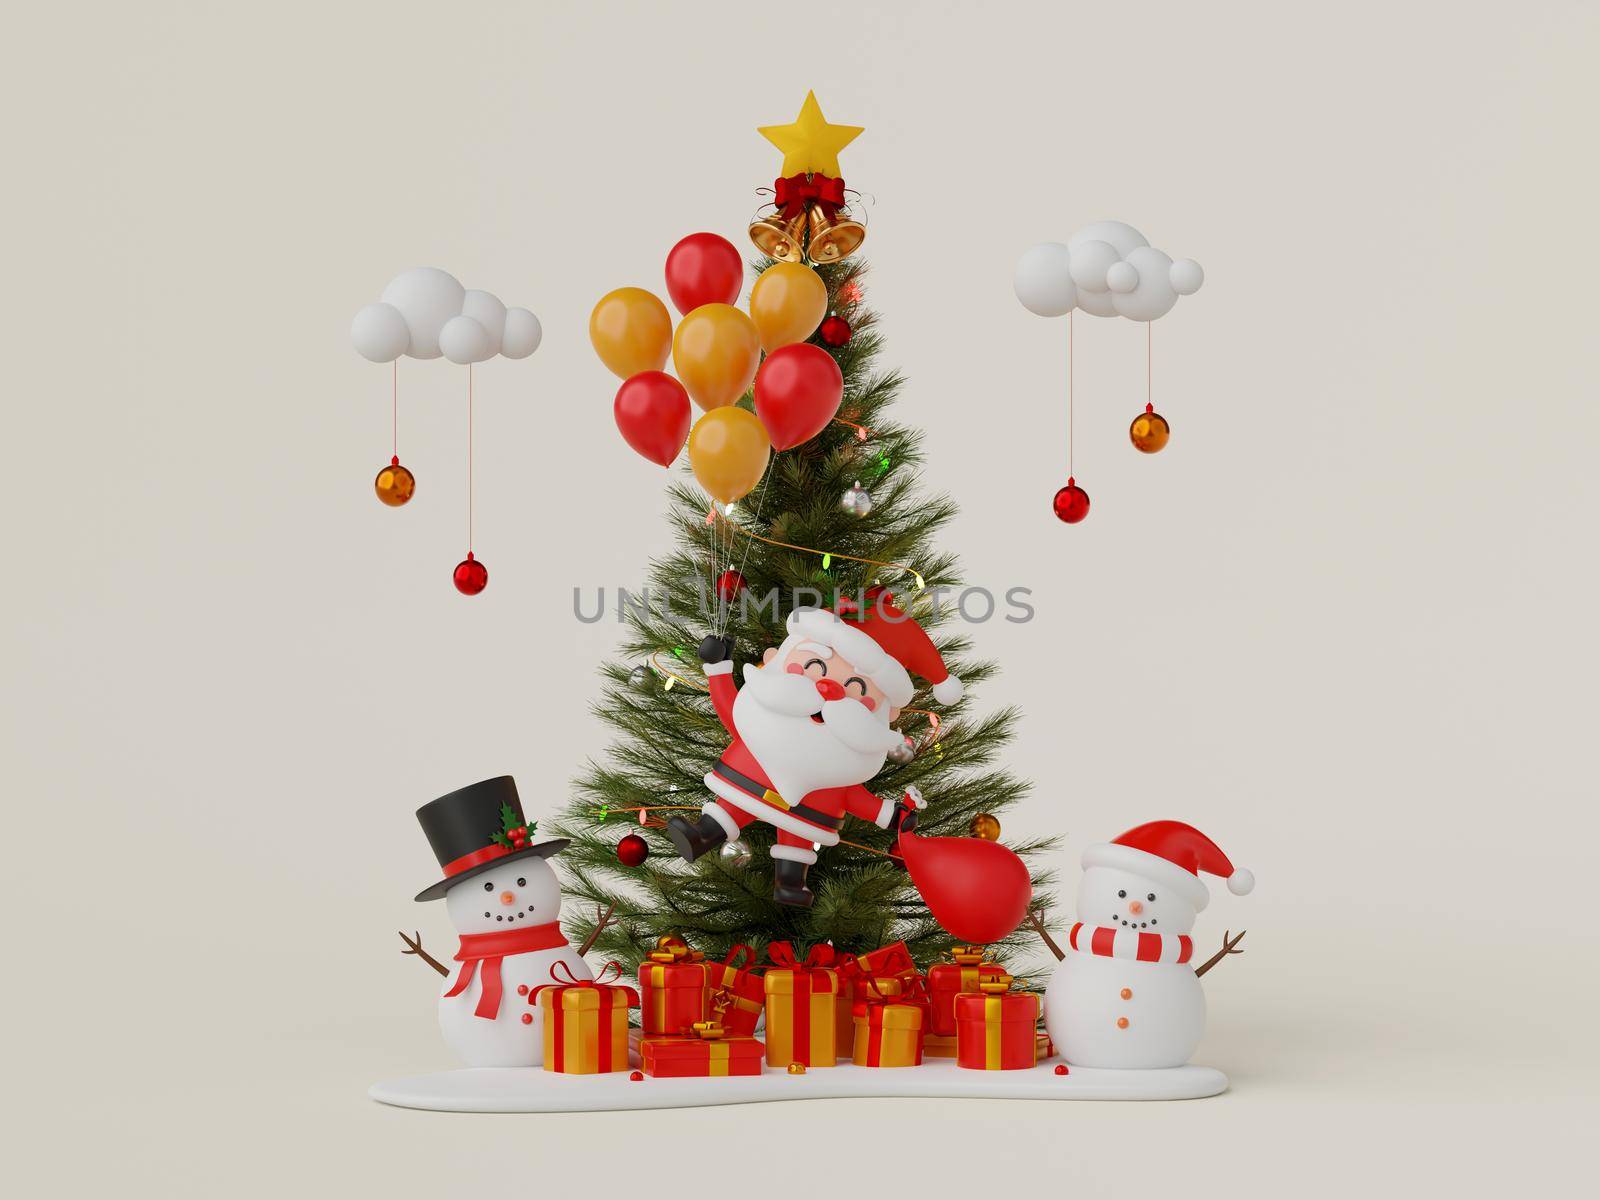 Christmas 3d illustration of Santa Claus and snowman with Christmas tree and gift box by nutzchotwarut